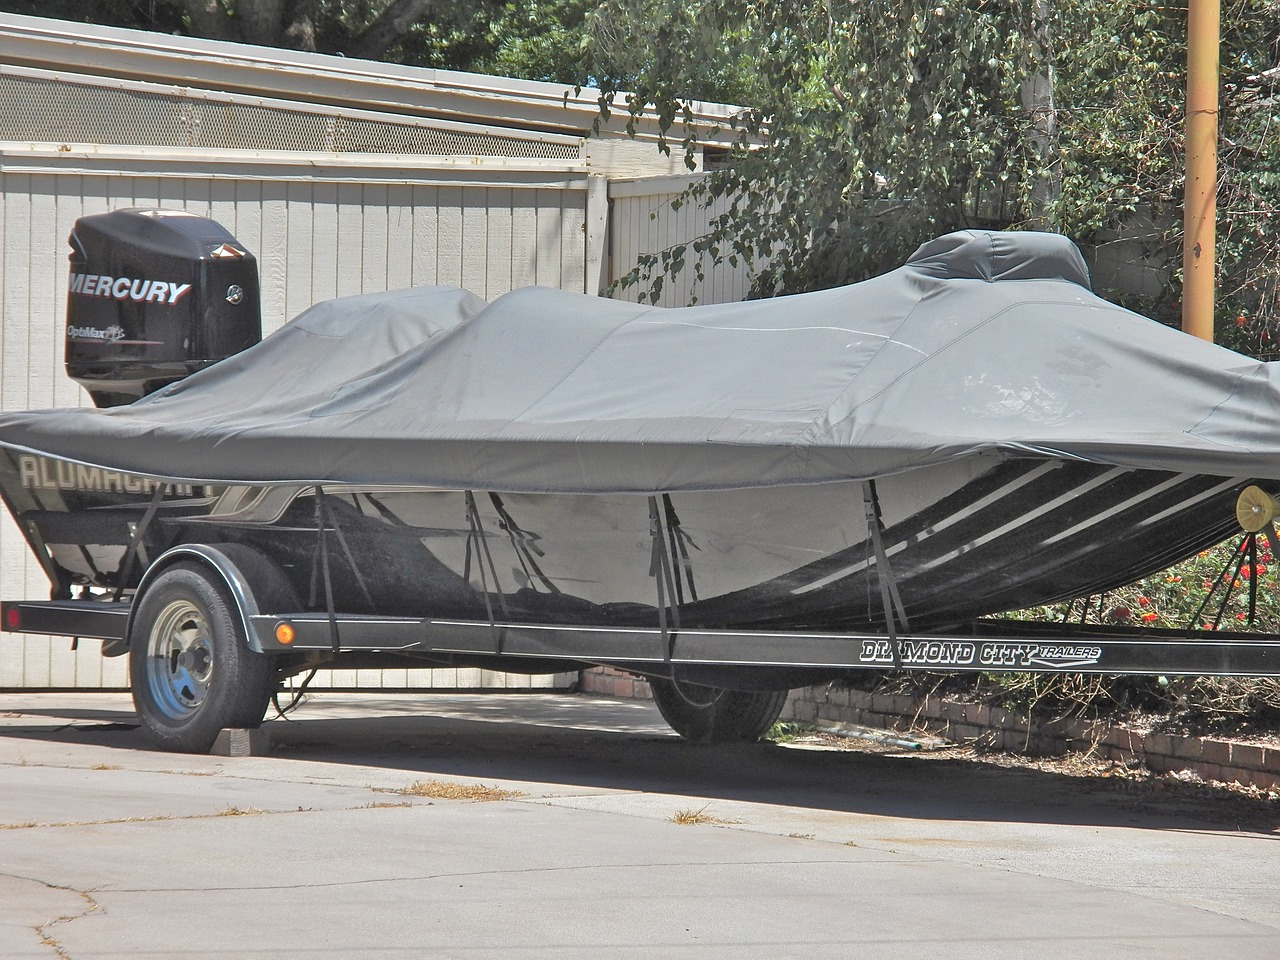 boat on a trailer with a boat cover